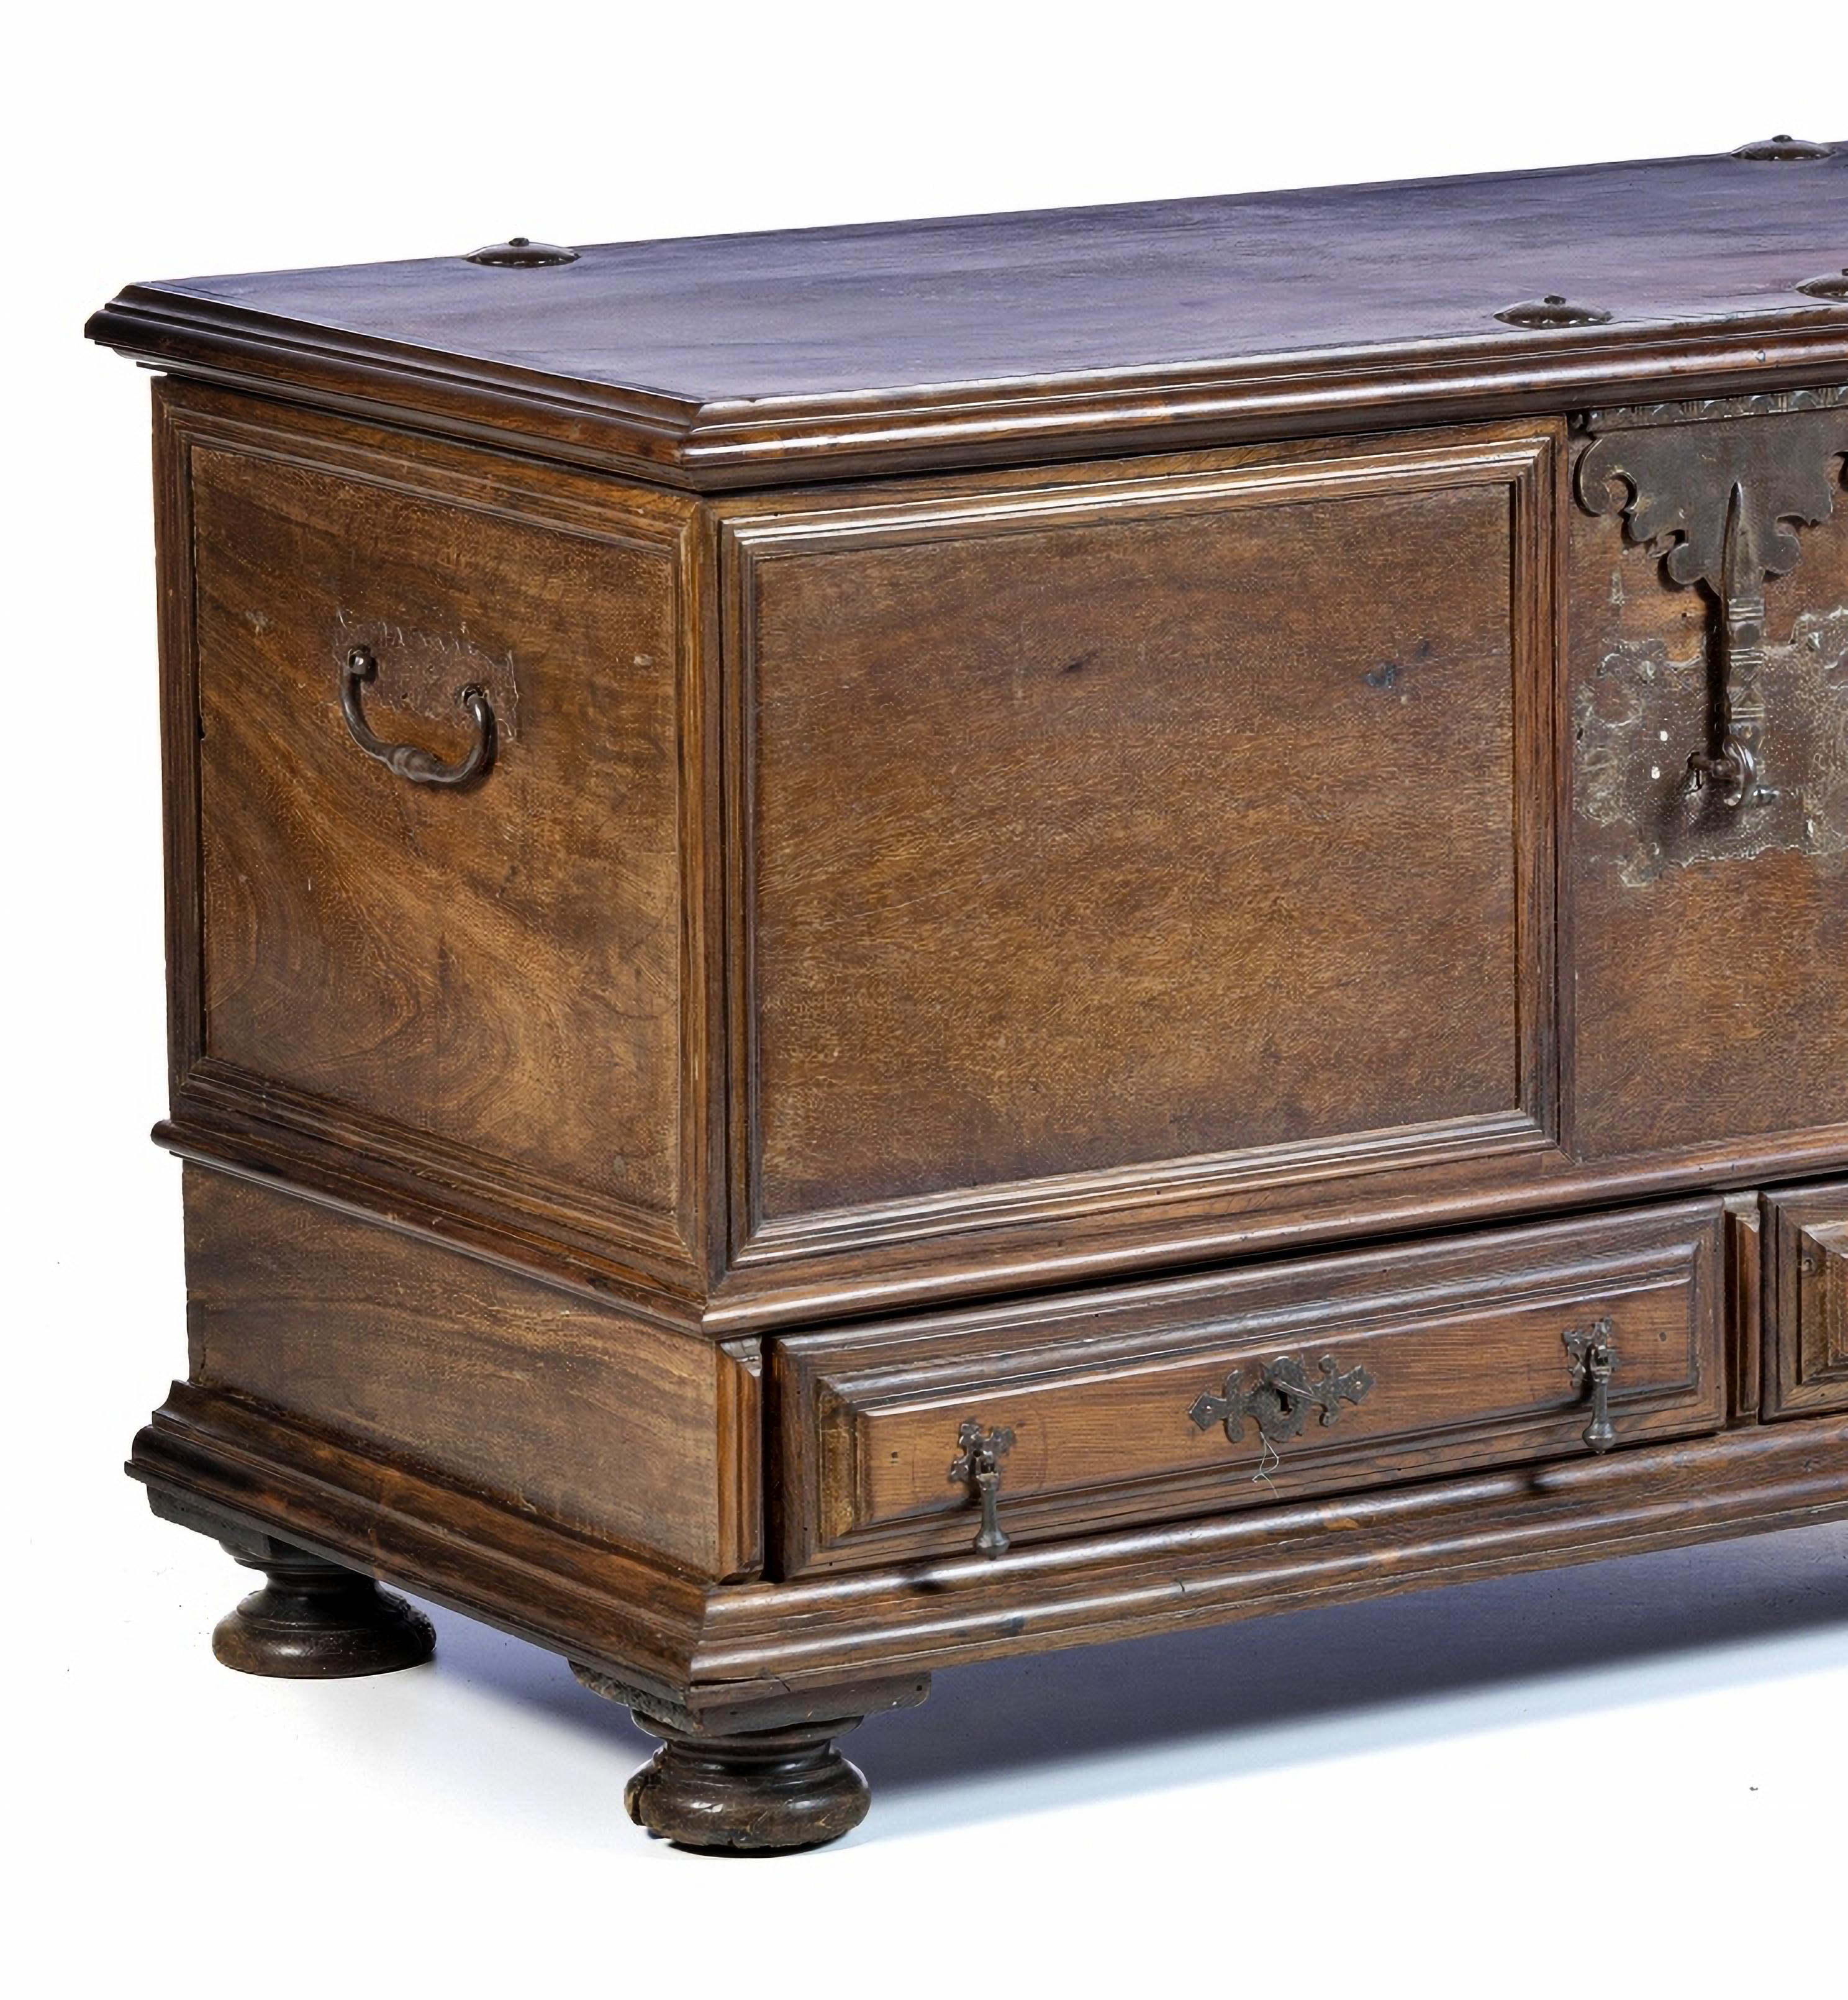 PORTUGUESE ROSEWOOD CHEST WITH TWO DRAWERS 17. Jahrhundert (Renaissance) im Angebot